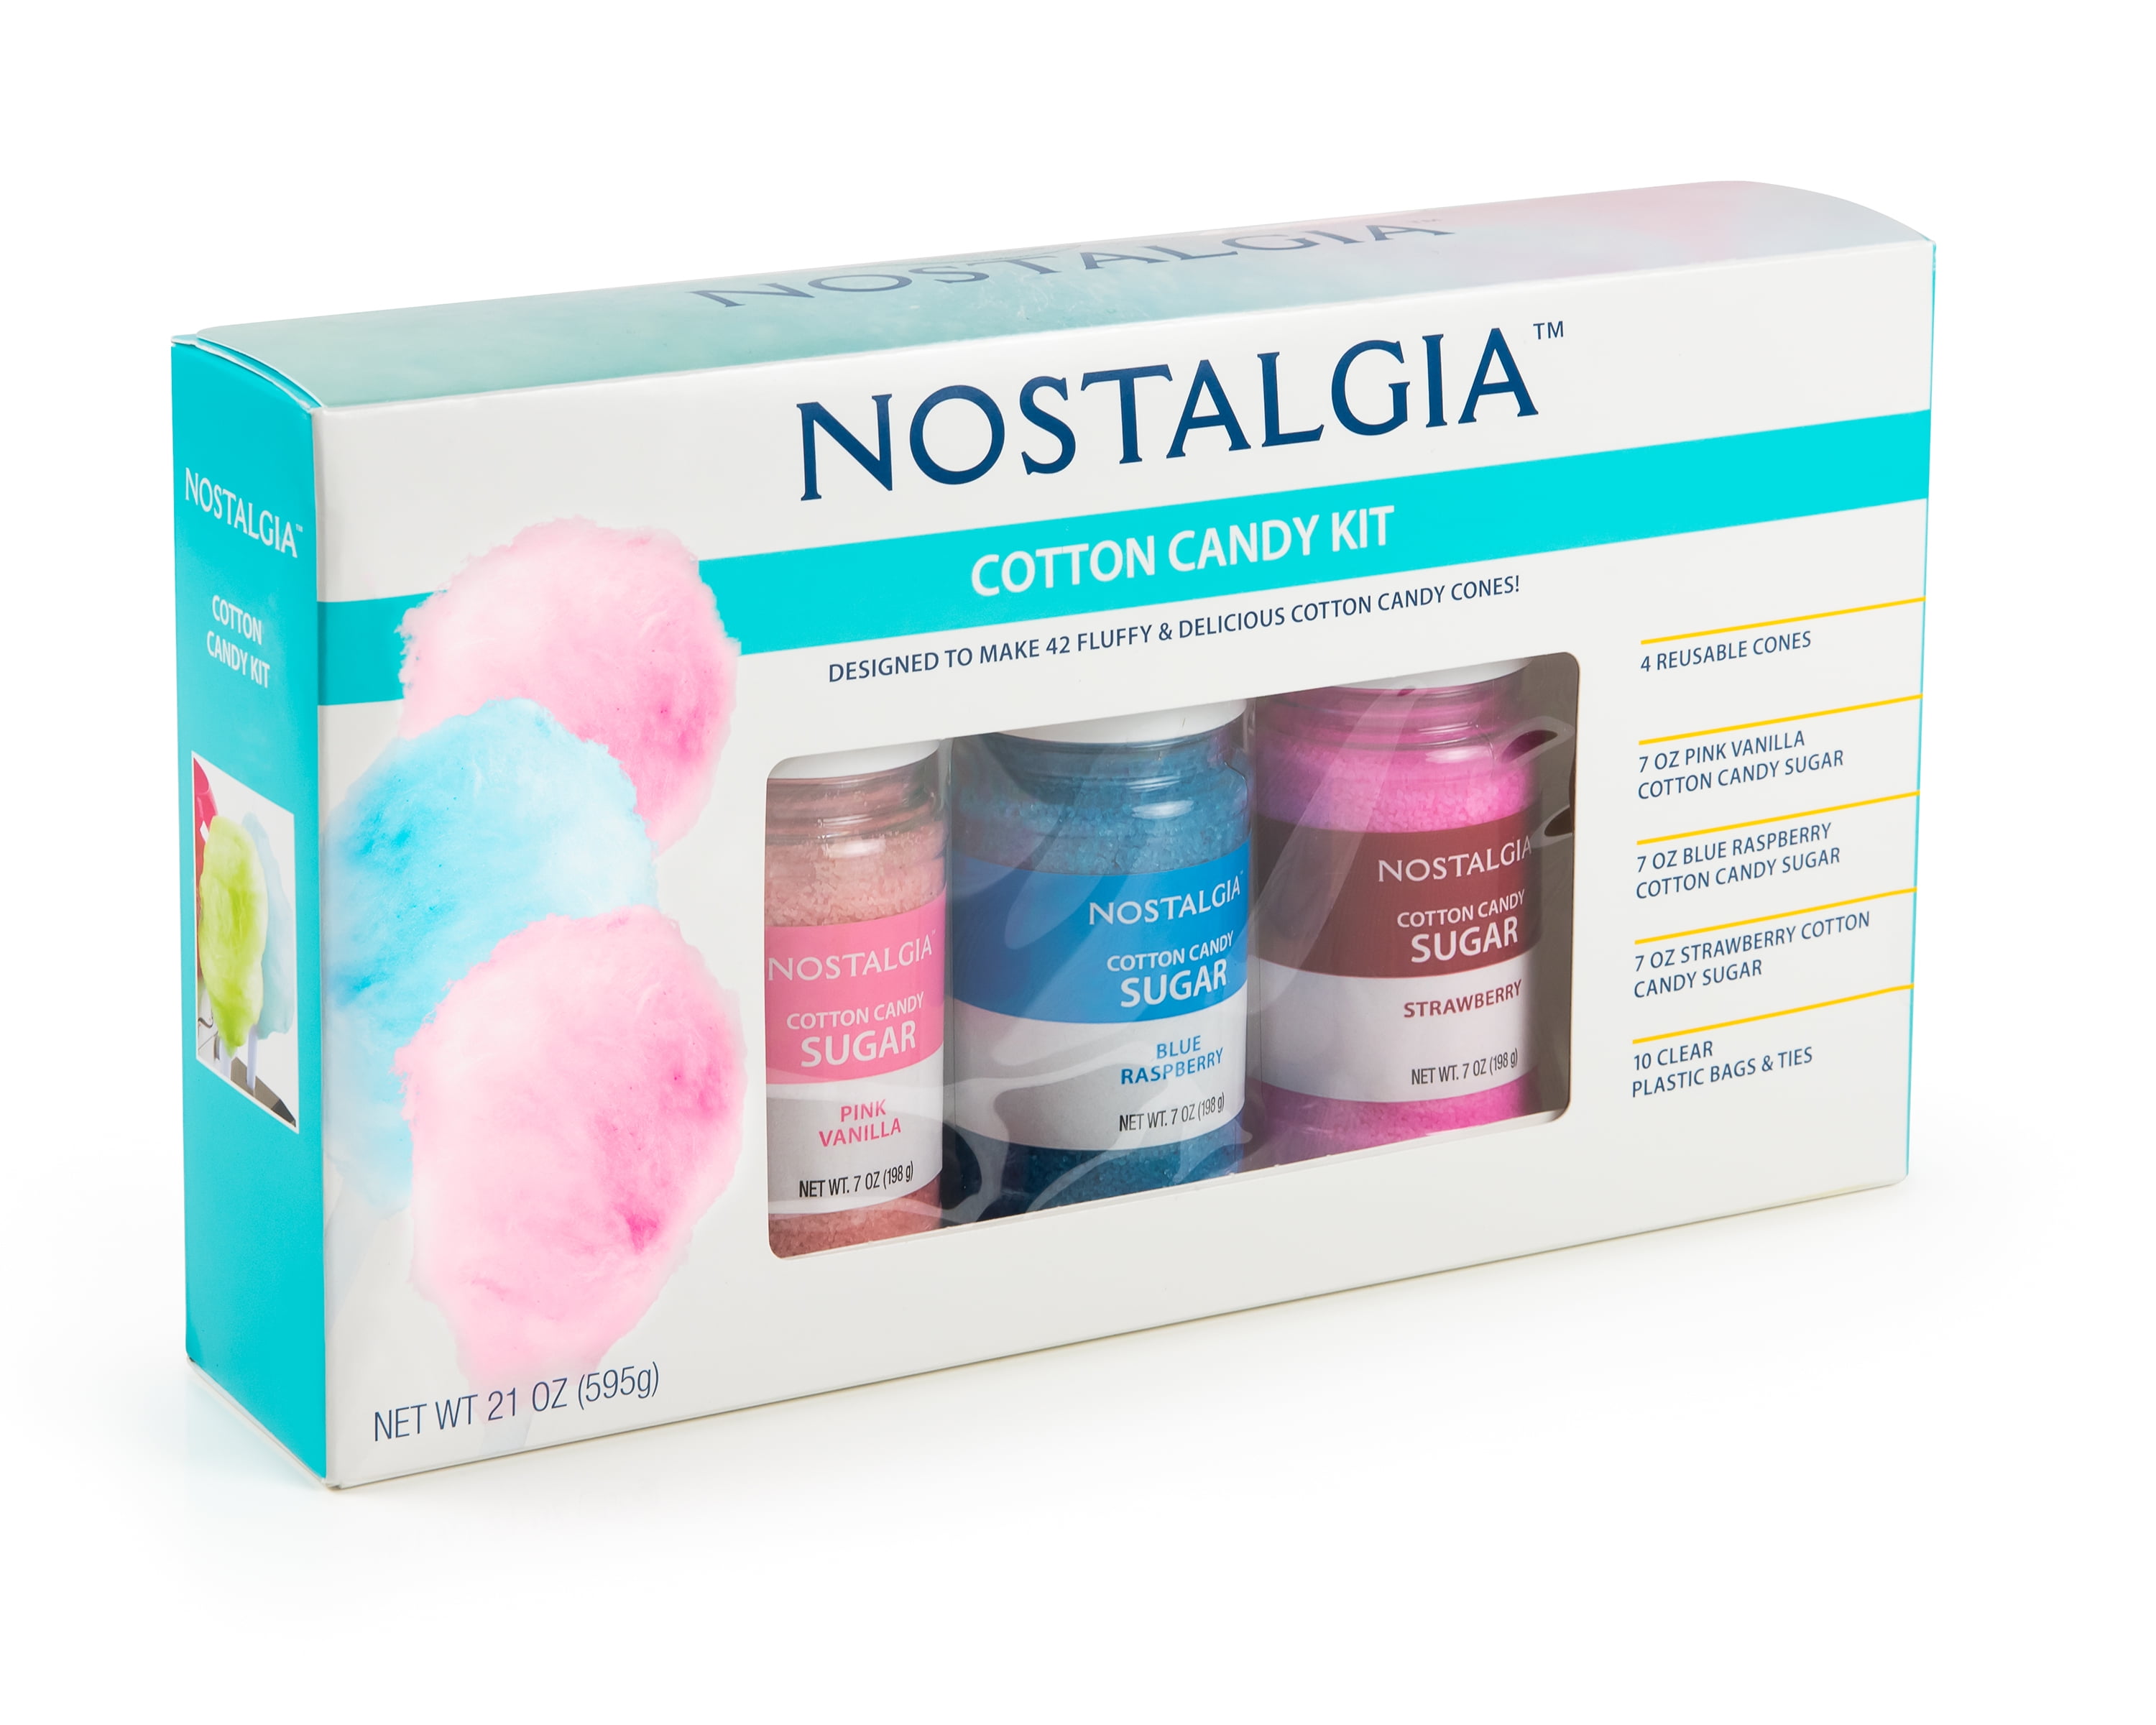 Nostalgia FSCC8 Cotton Candy Party Kit, 3 7-oznbsp;Flossing Sugars,  Reusable Cones and Twist Ties - Walmart.com